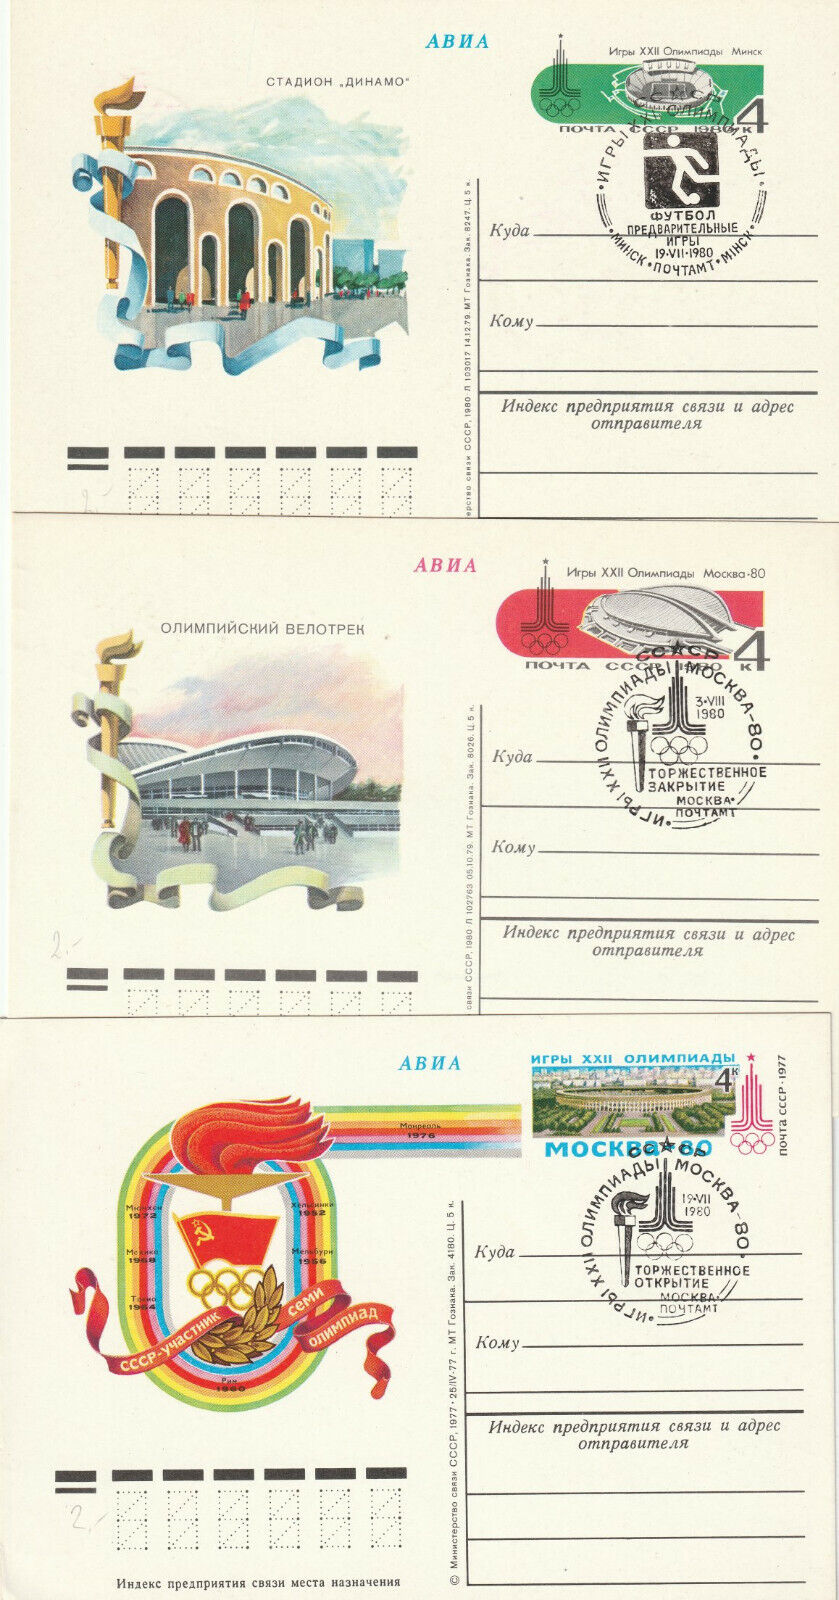 USSR, 6 stationery items stamped with special stamps